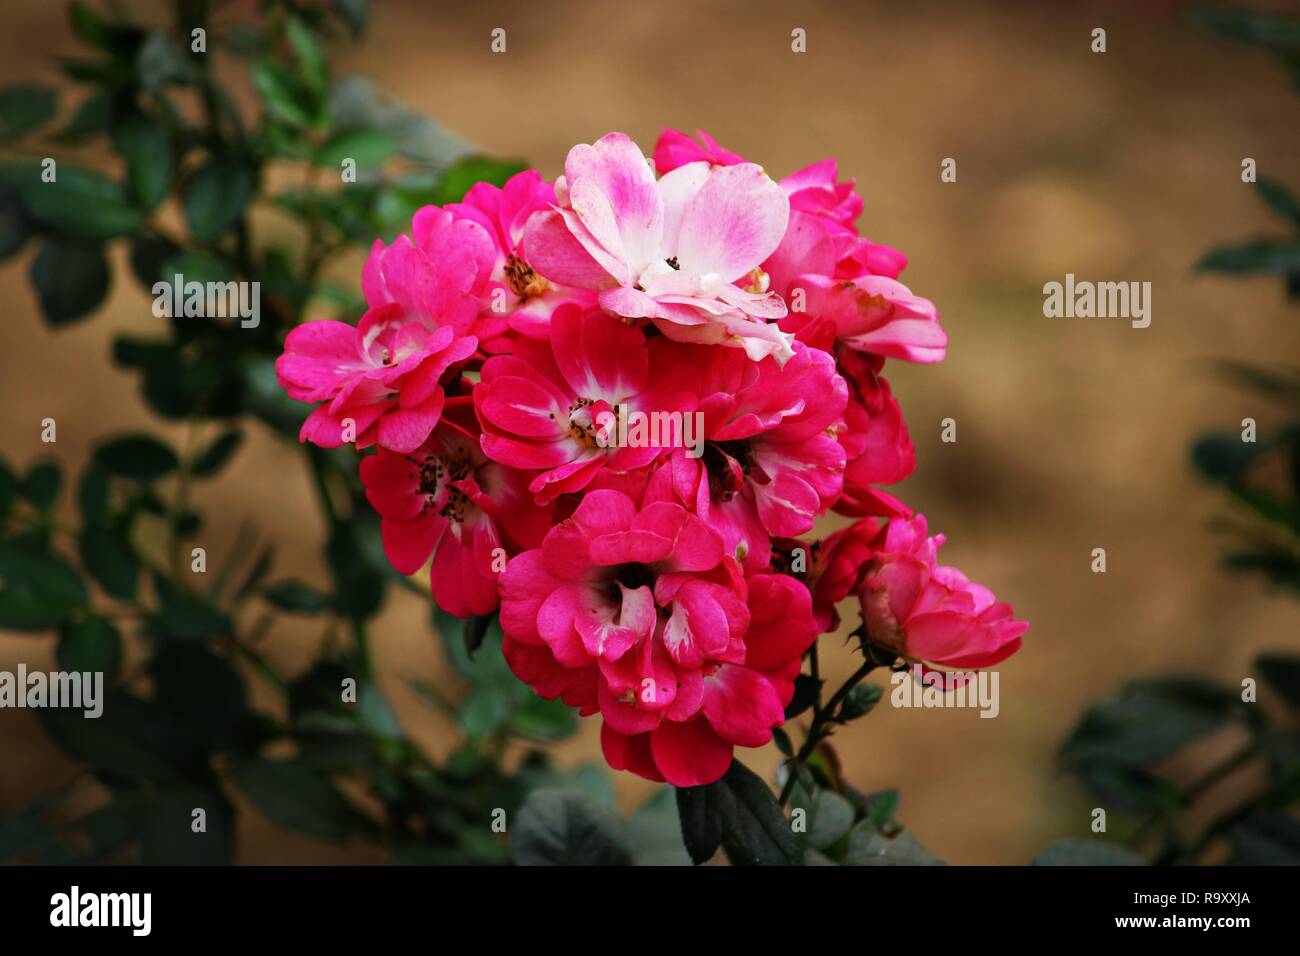 A beautiful bunch of pink flowers Stock Photo